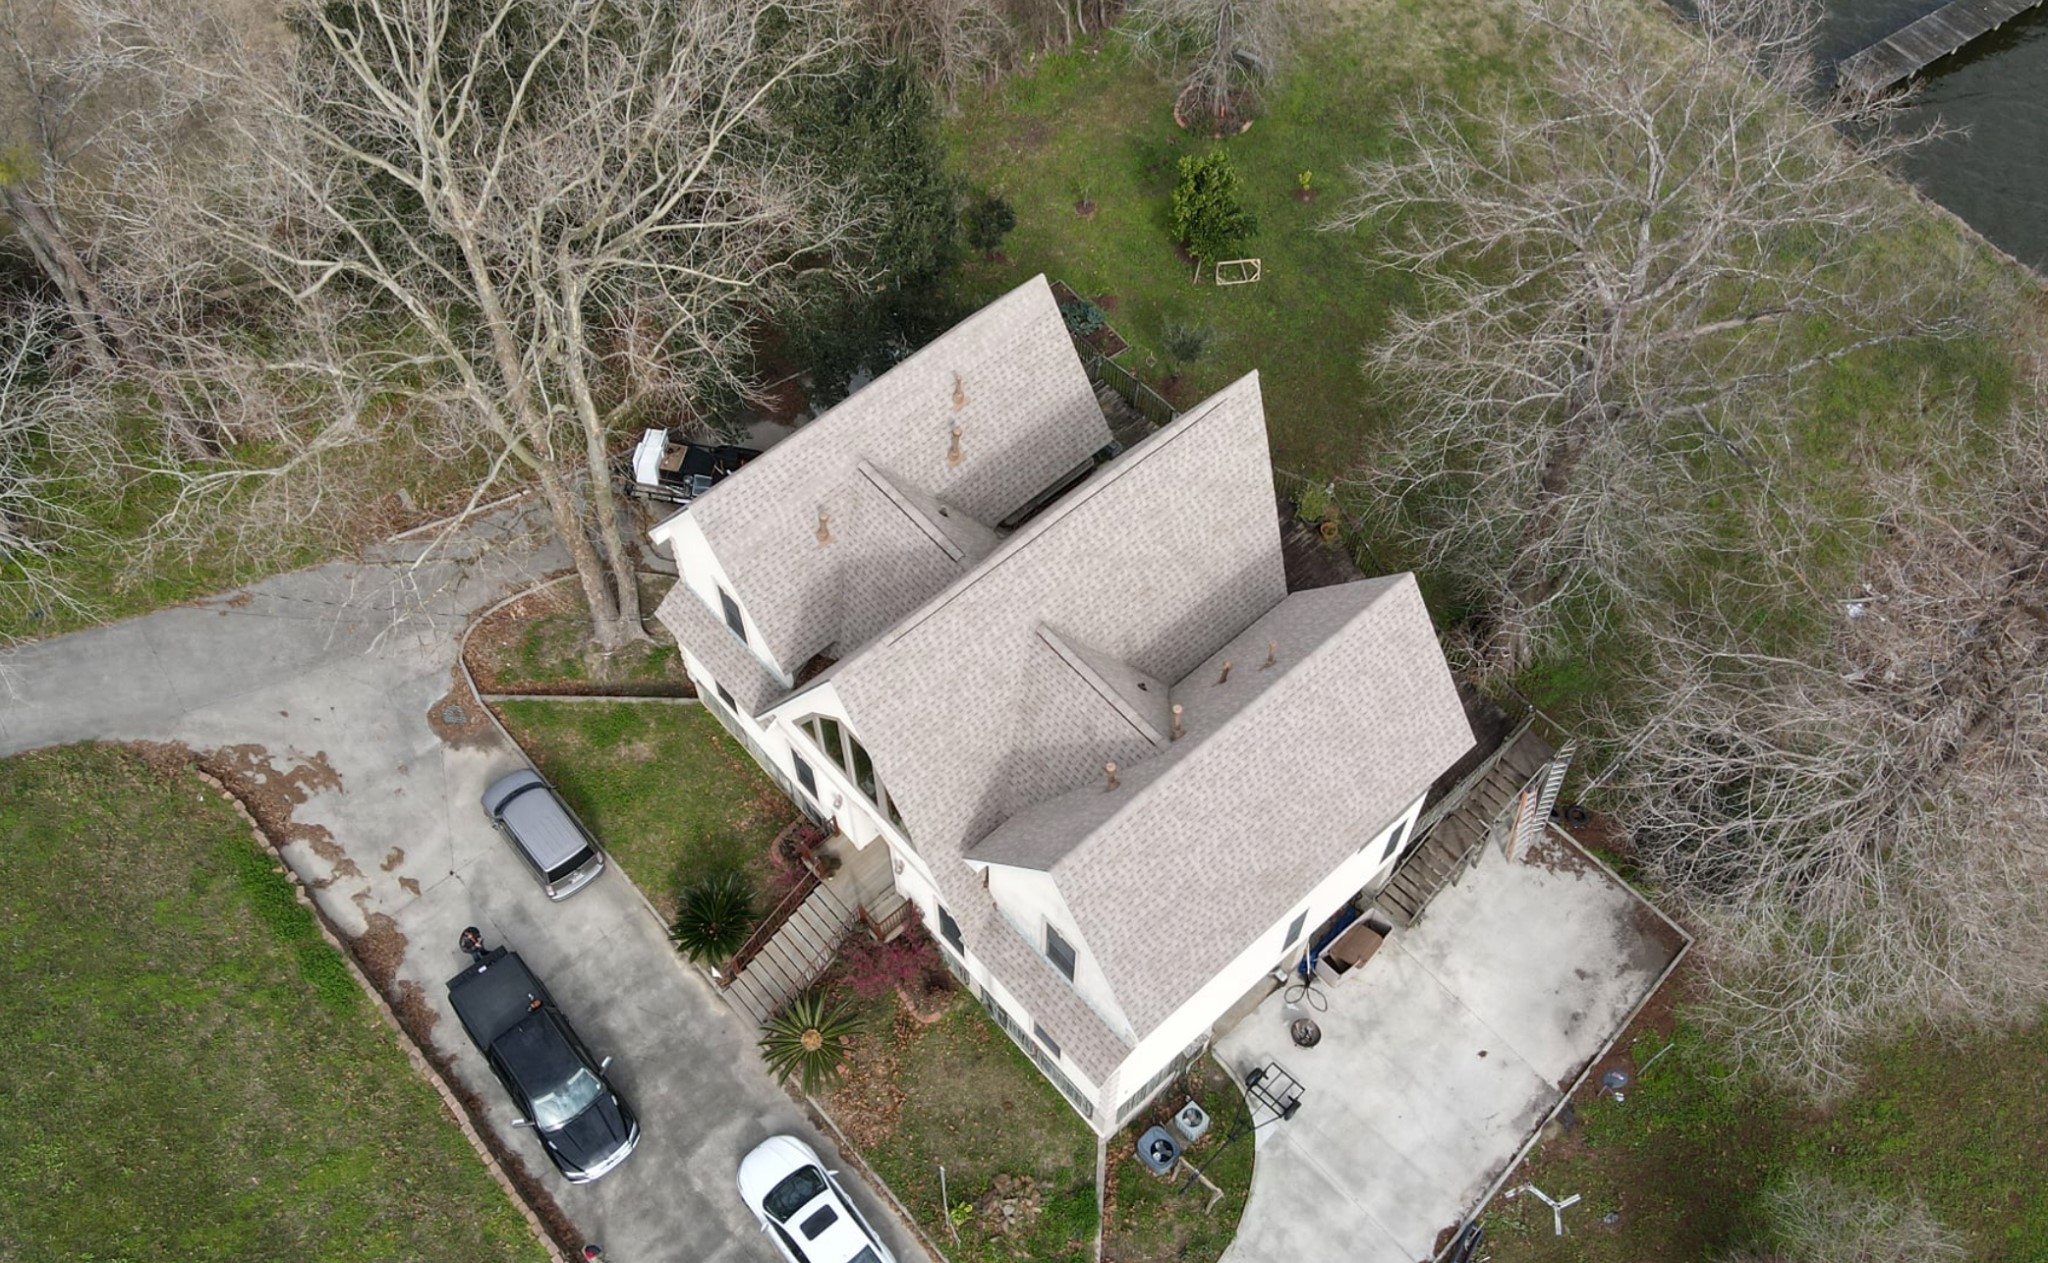 drone shot of new louisiana roofing finished job